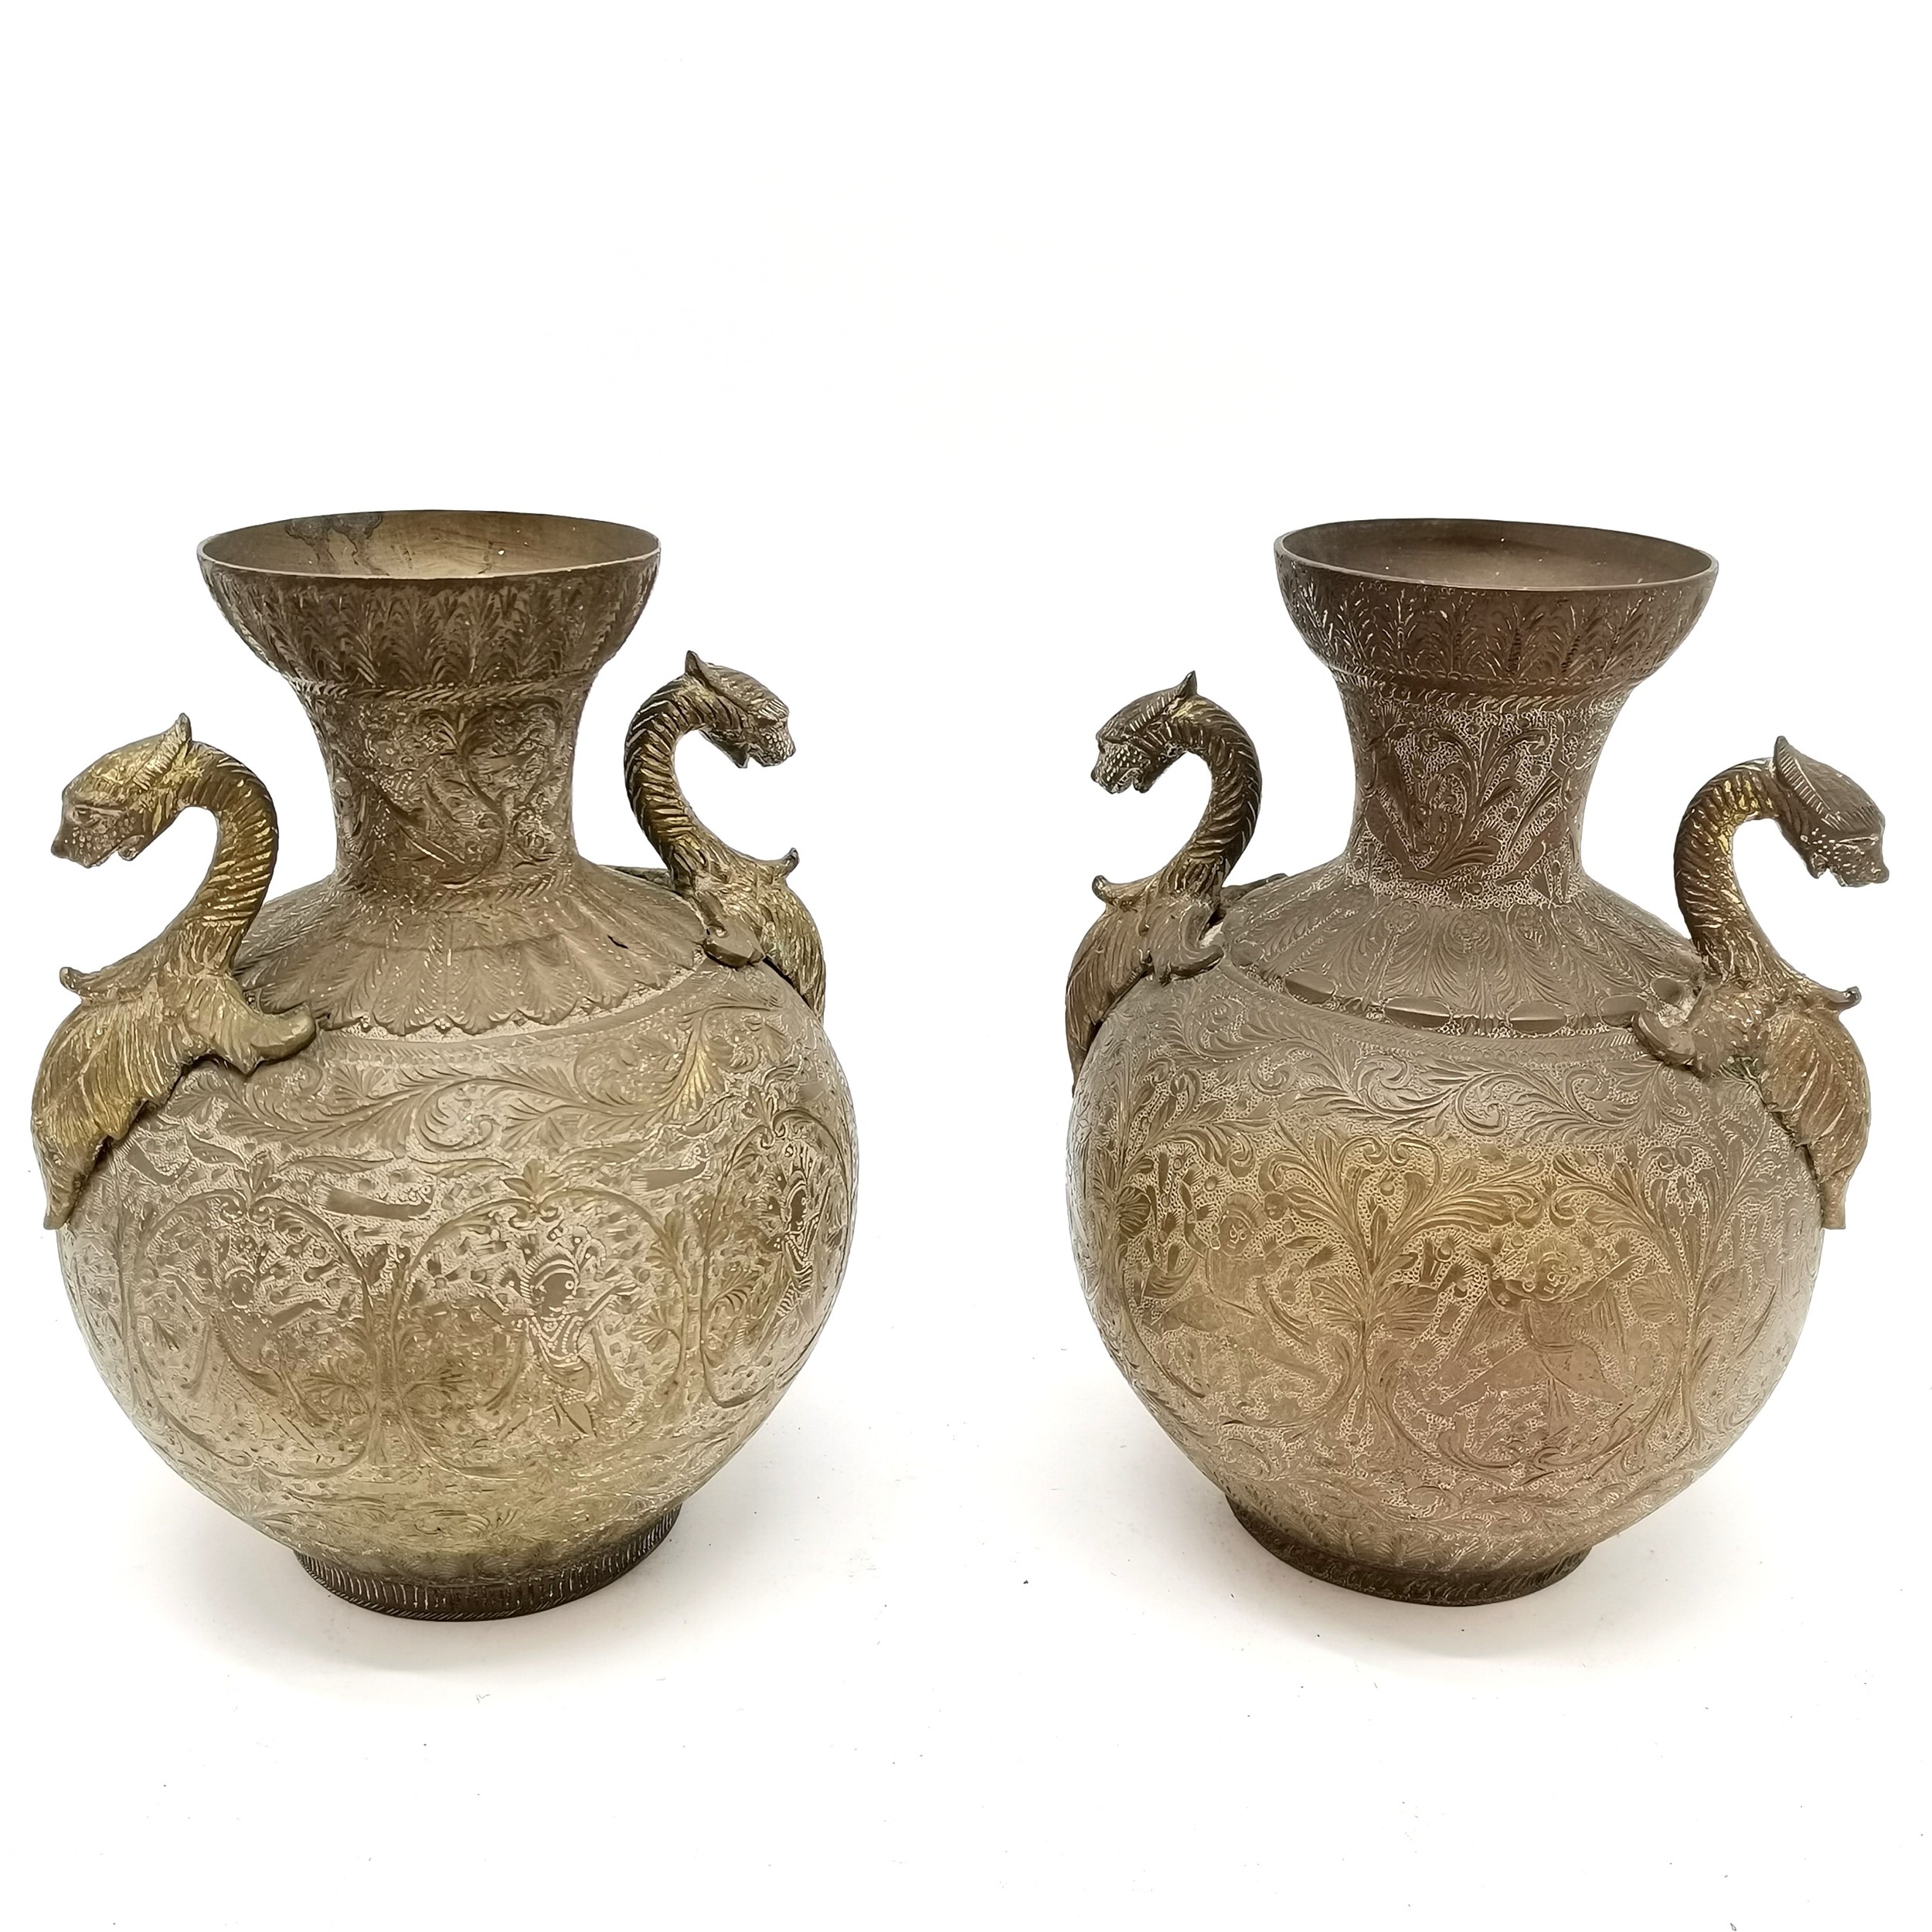 Indian pair of brass 2 handled vases - 21cm high with engraved detail of dancers to the bodies